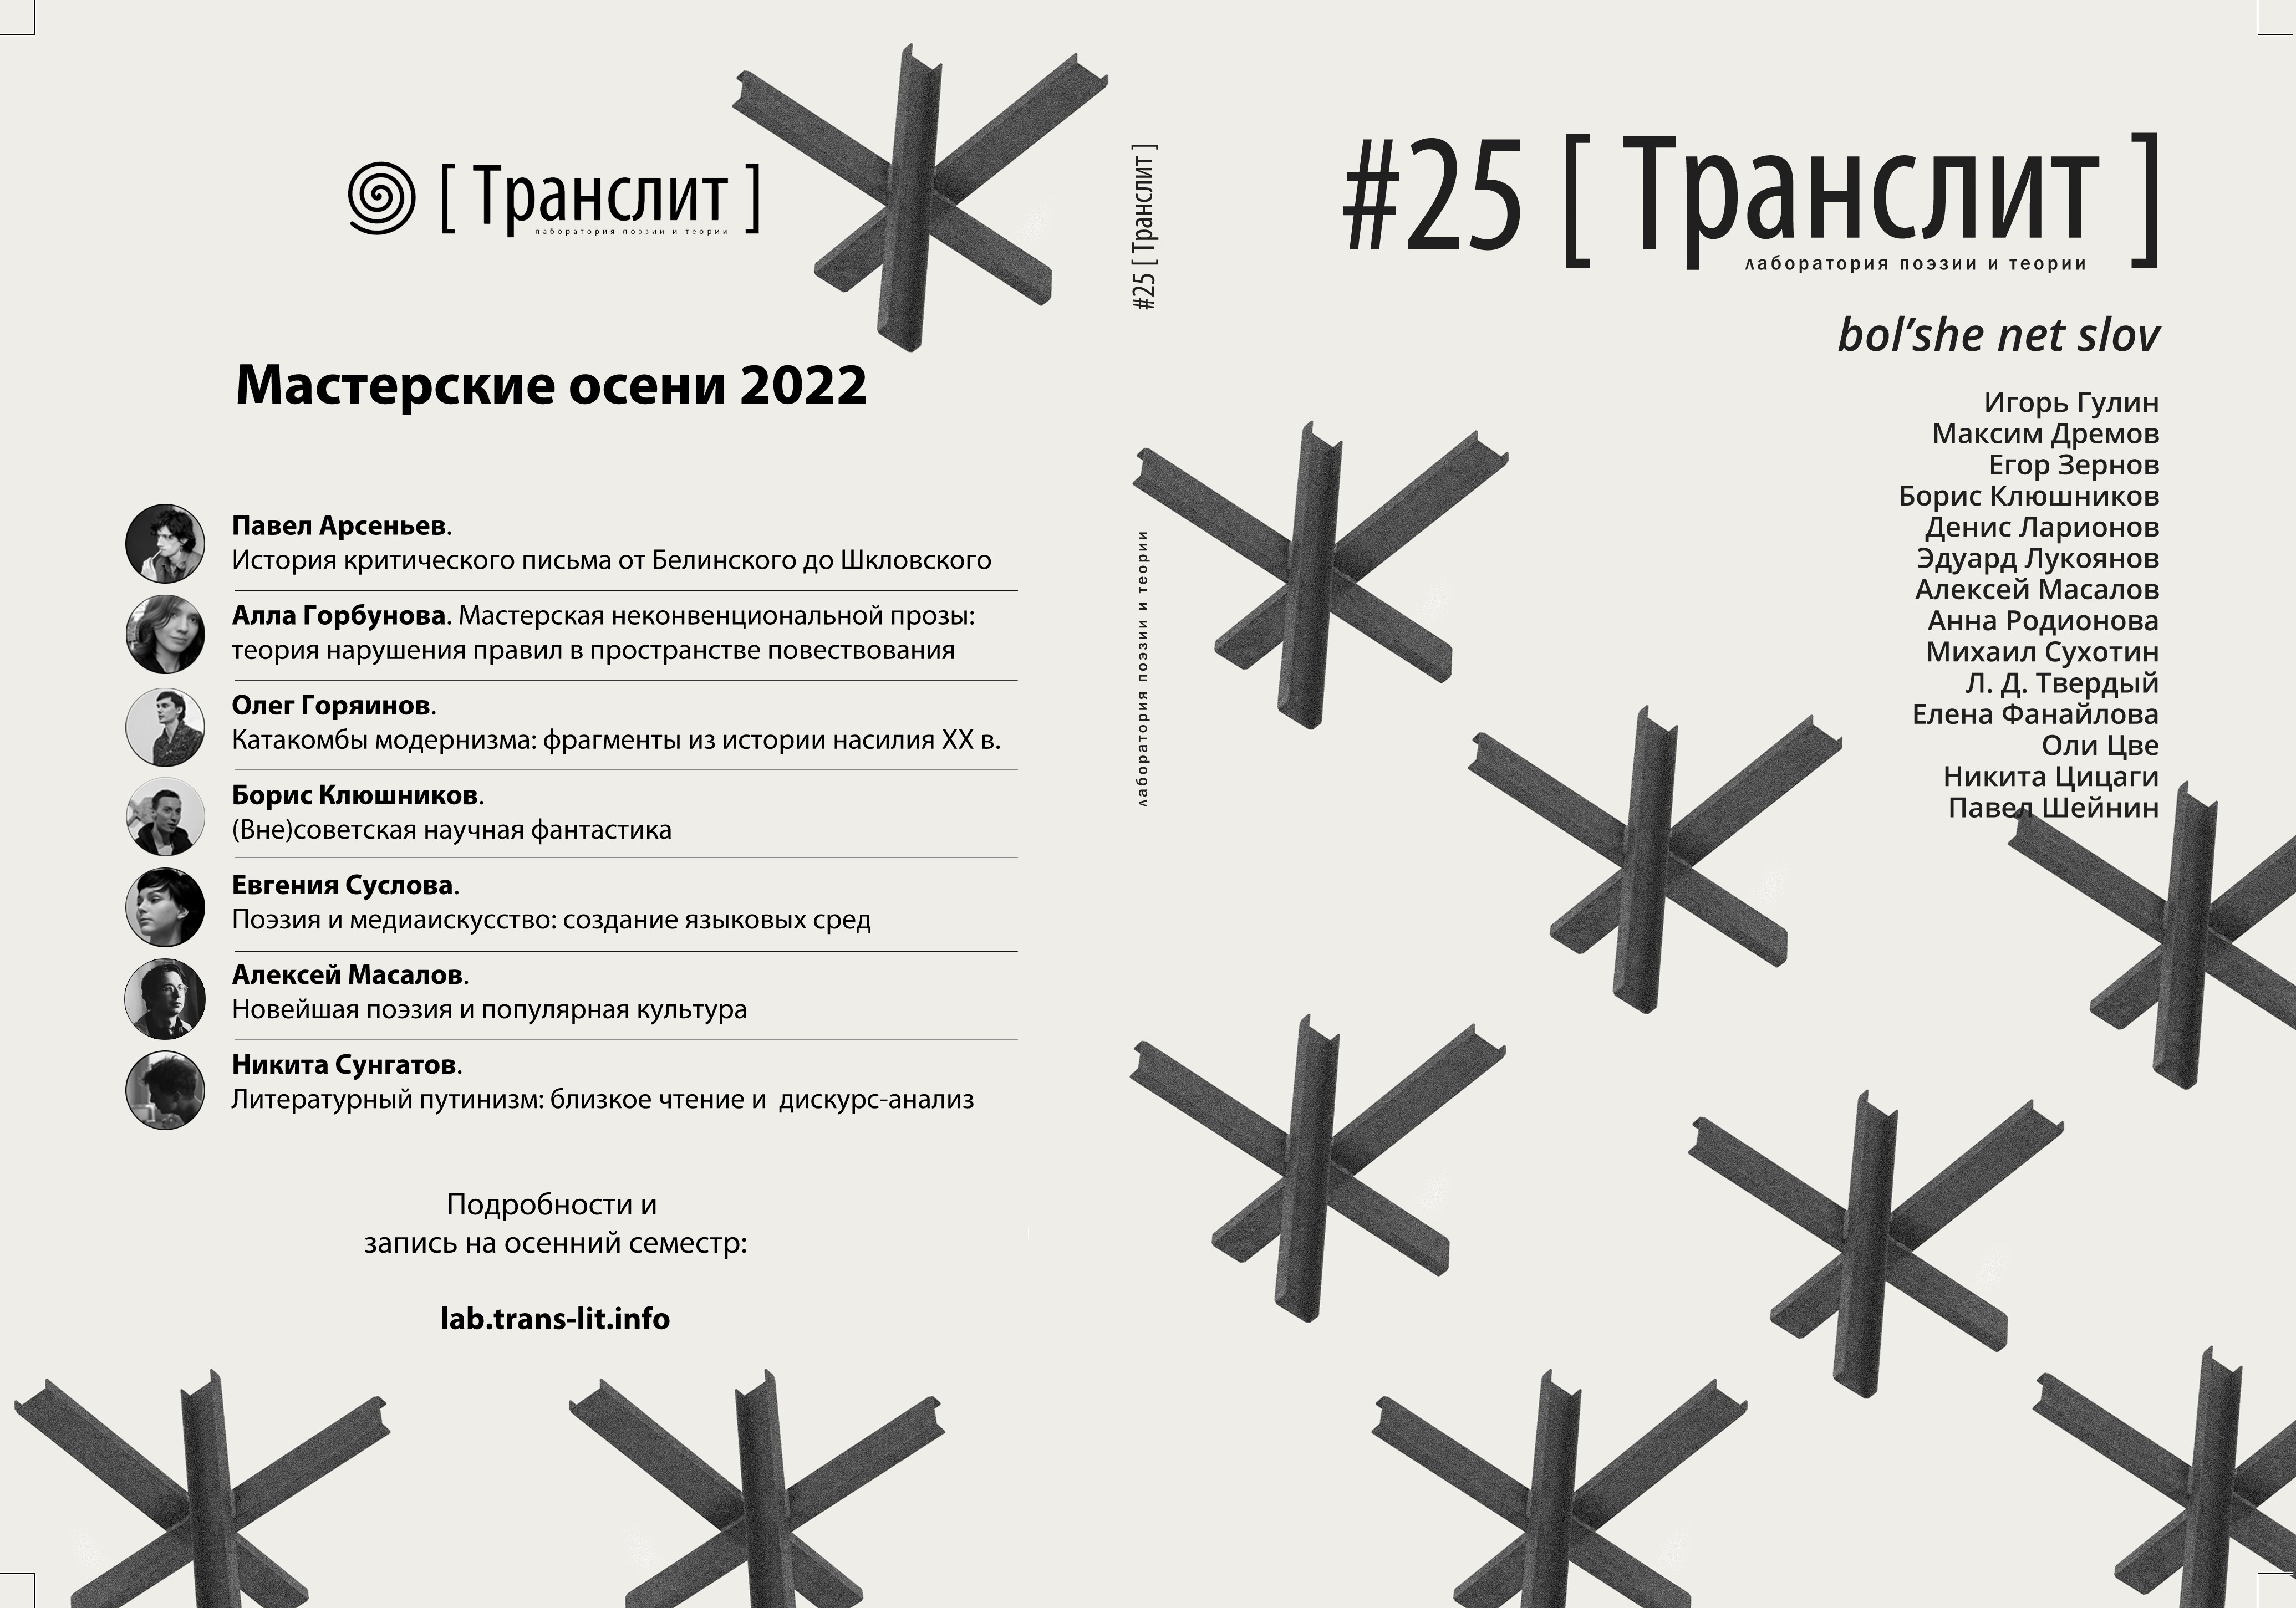 #25 of [Translit] cover and list of seminars in [Translit] laboratory in this year